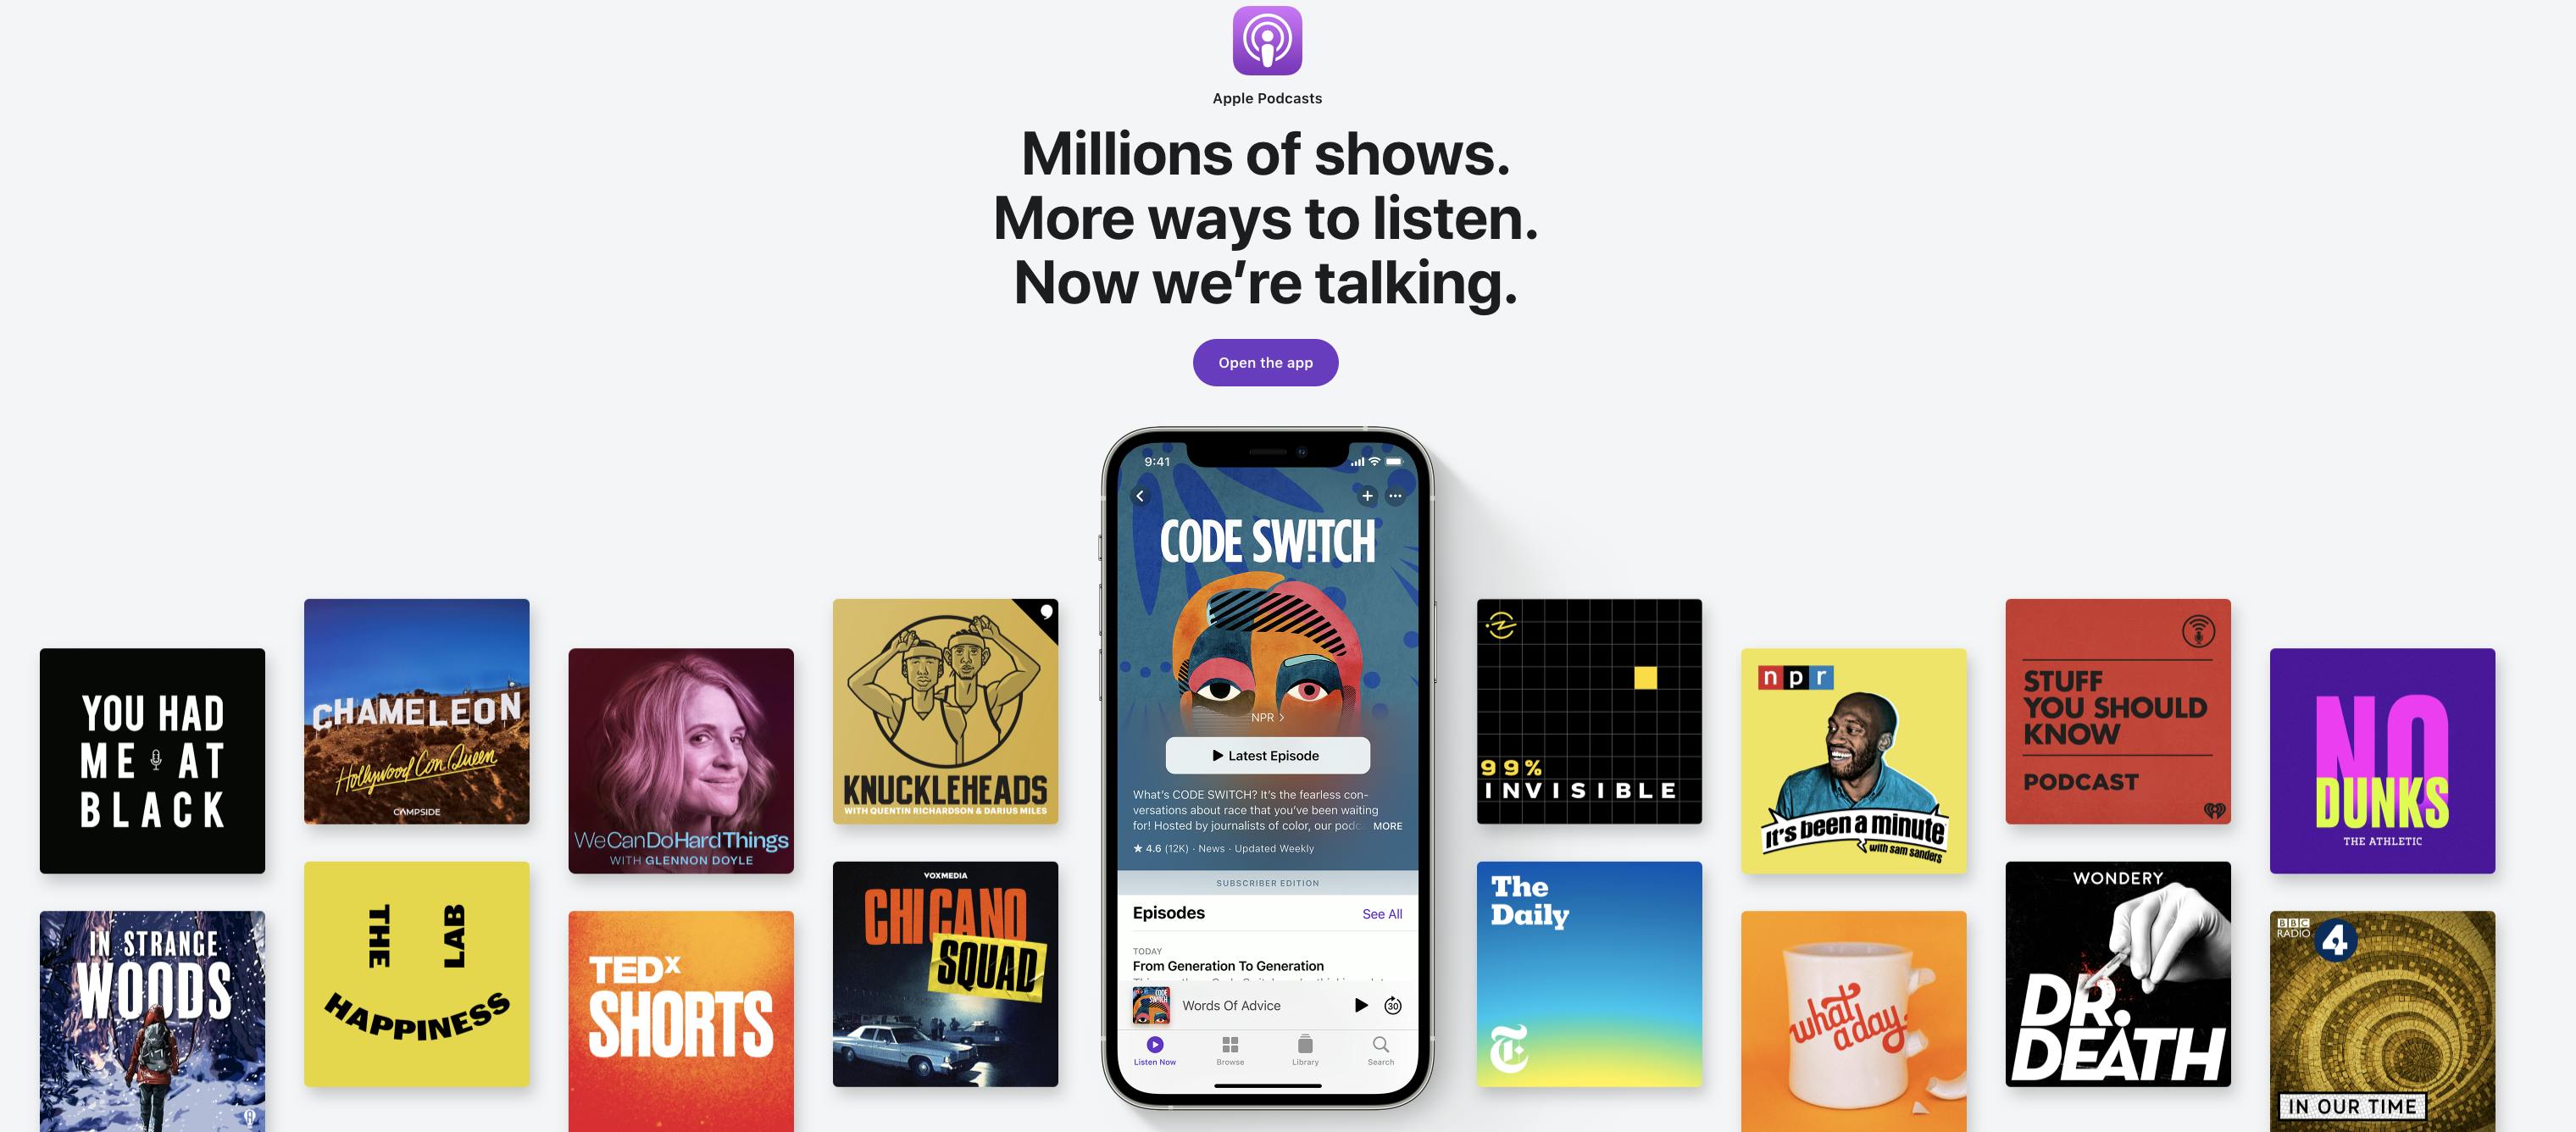 Transfer Spotify-Exclusive Podcasts Back to Apple Podcasts - The